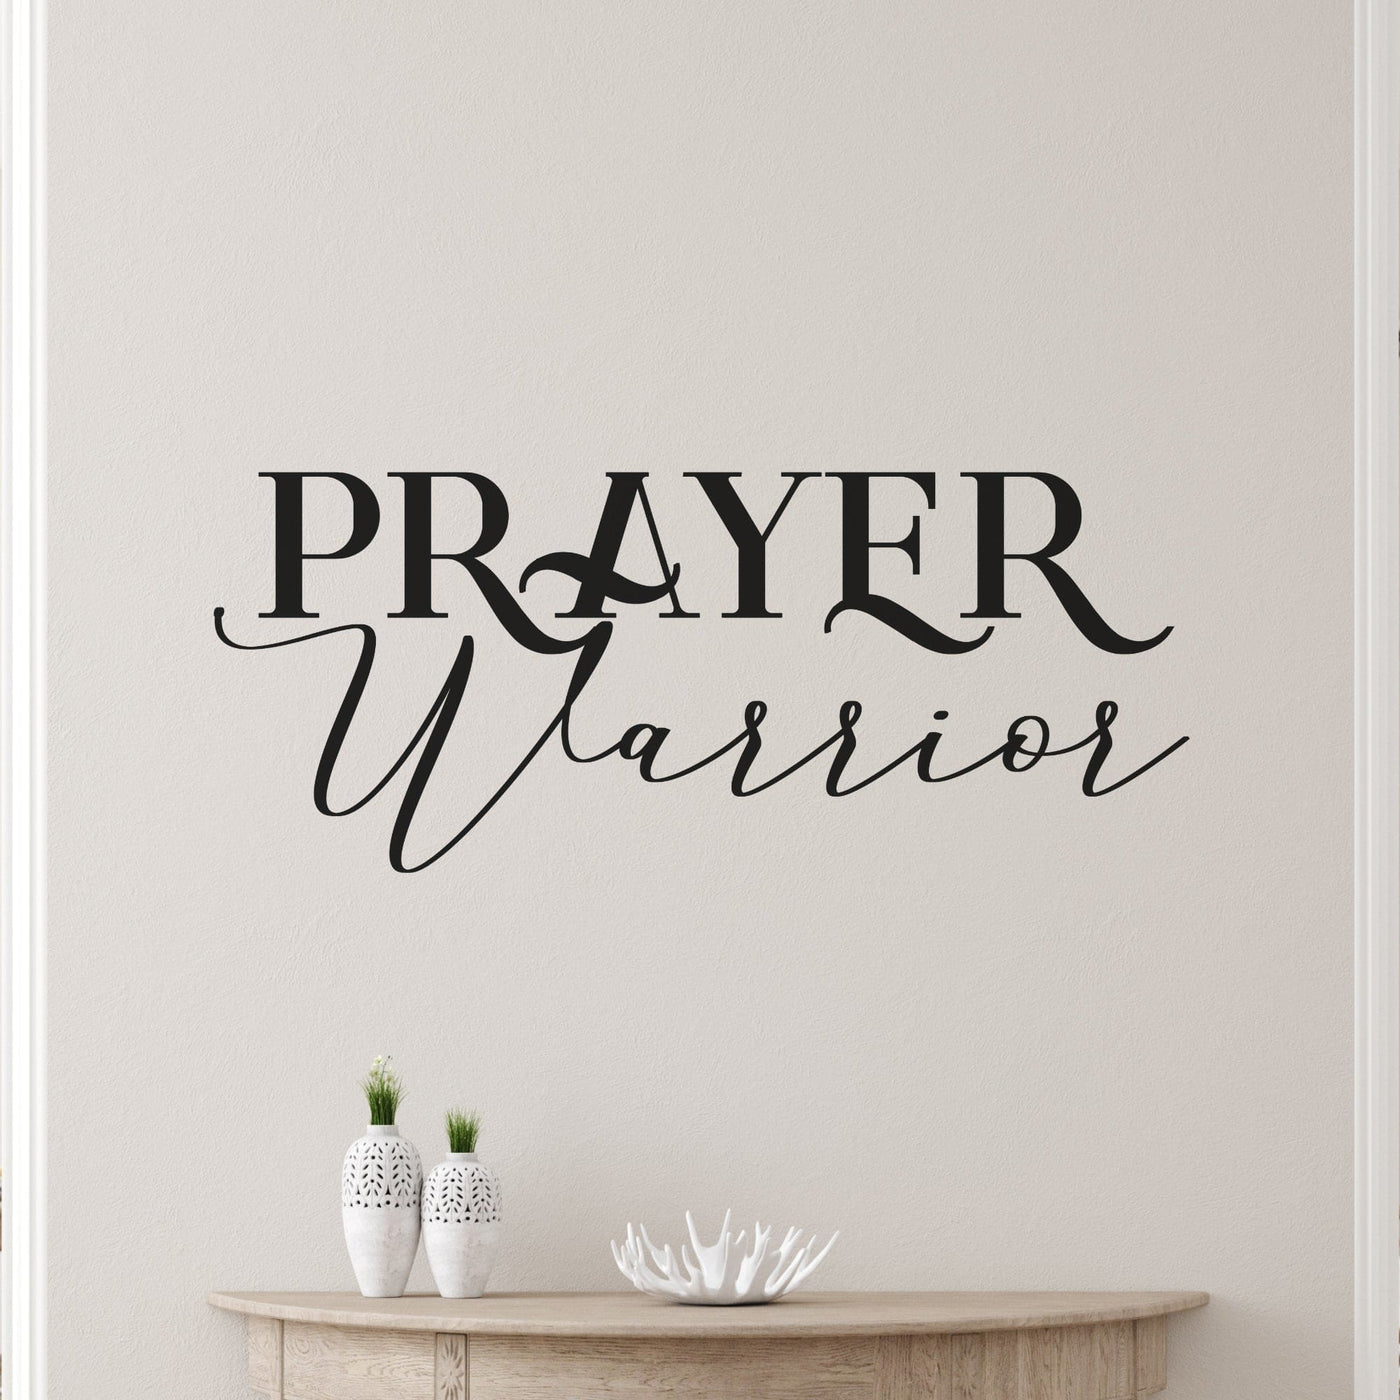 Decor - Prayer Warrior Removable Vinyl Wall Decal Easy Peel And Stick Wall Art -